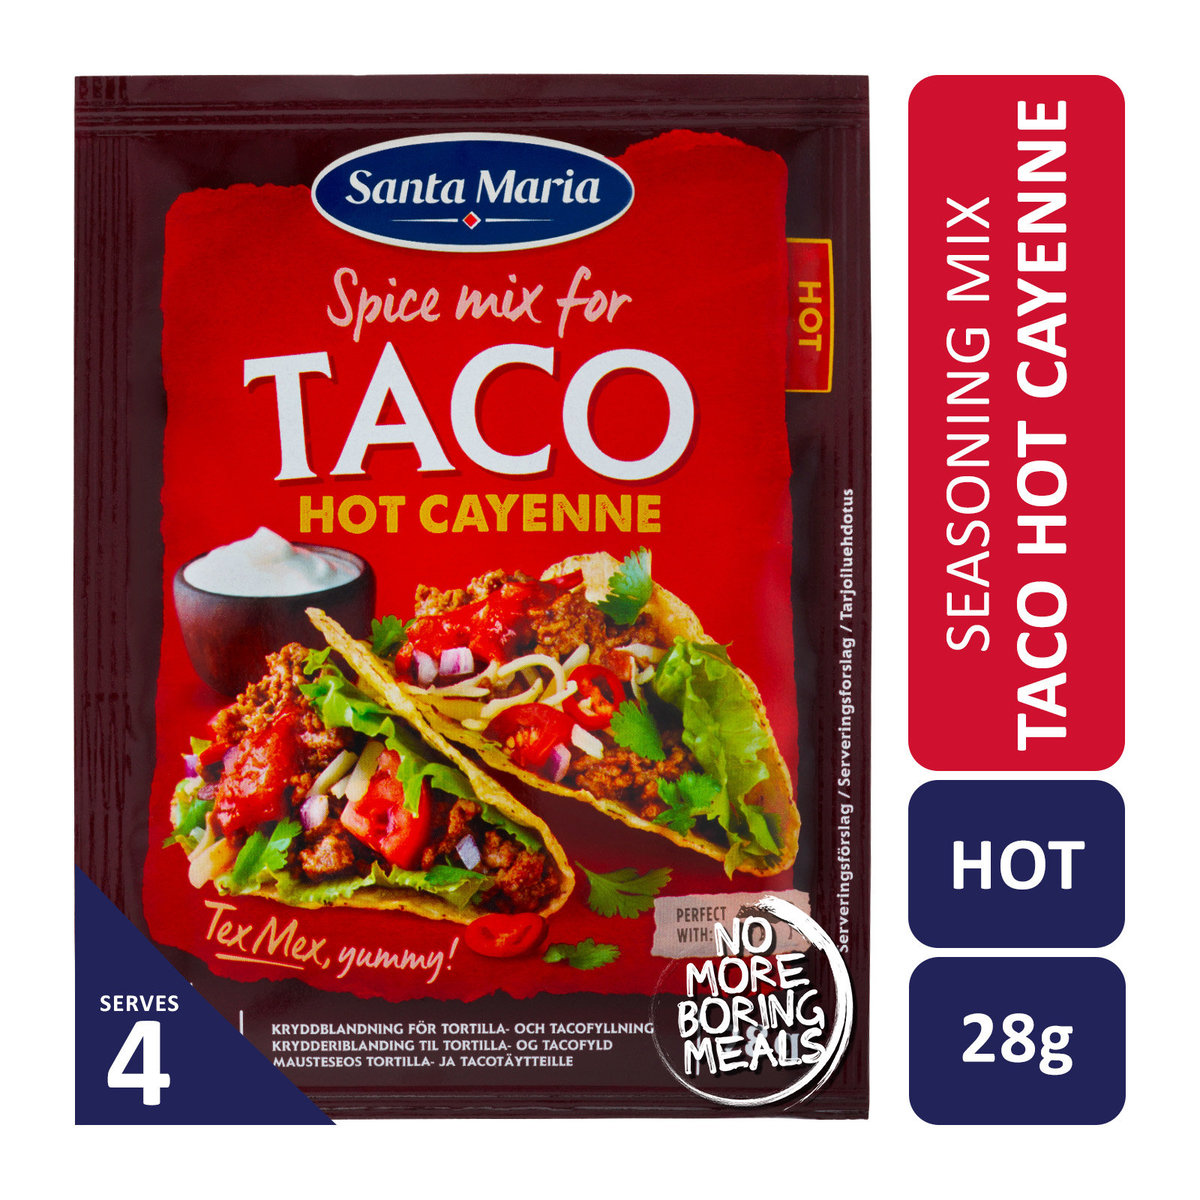 Taco Spice Mix Hot Cayenne 28g (Best before: 17 May 2025)